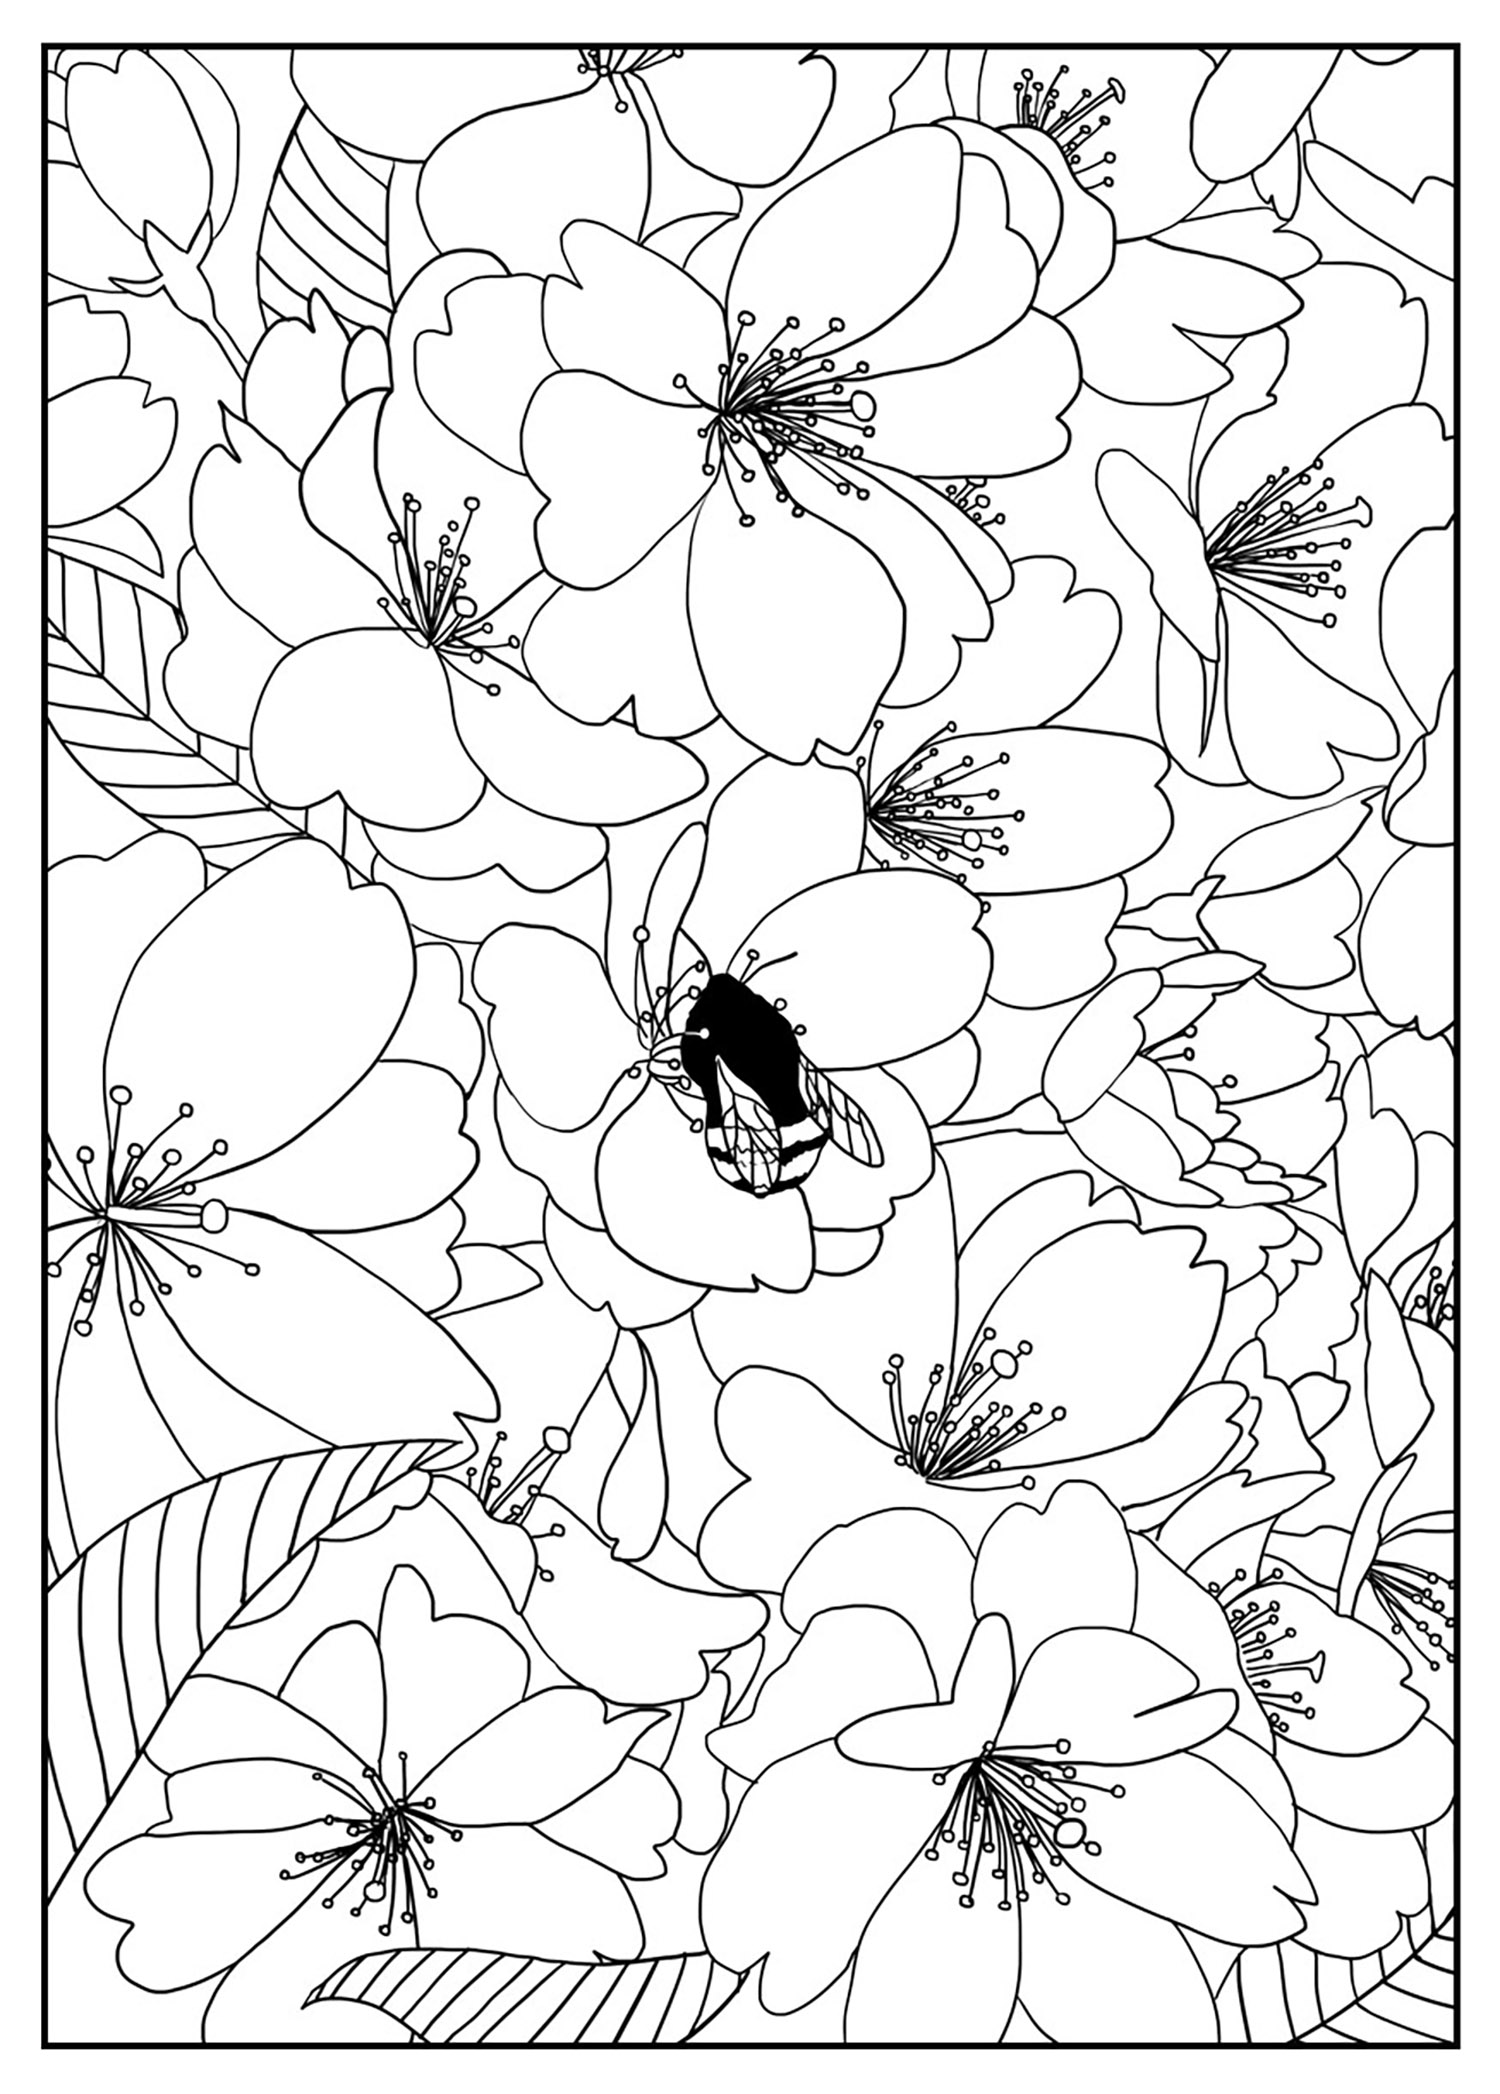 Image of Flowers to print and color